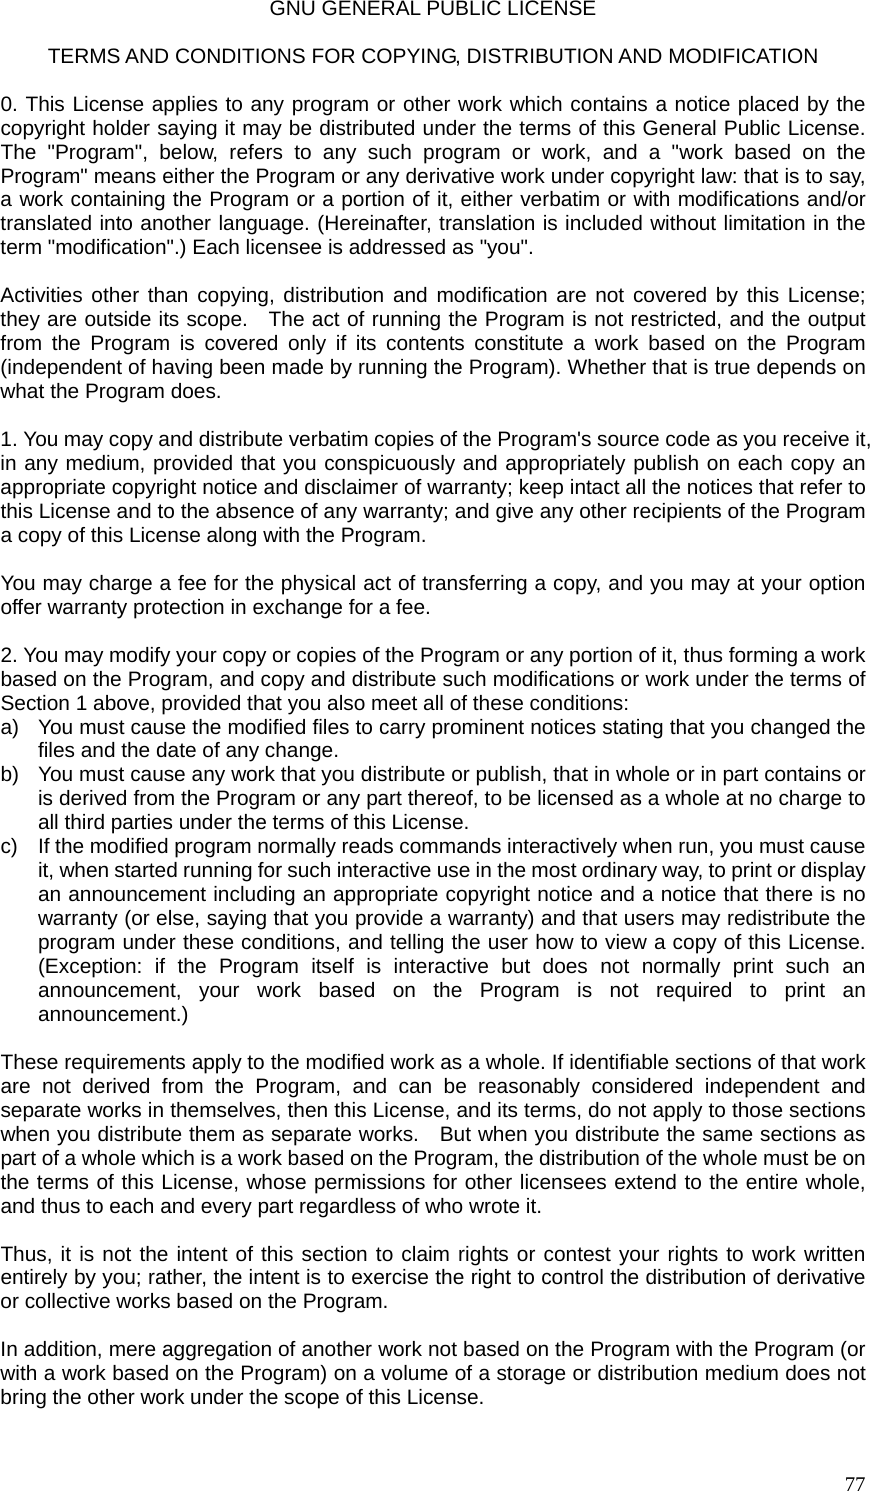  77GNU GENERAL PUBLIC LICENSE  TERMS AND CONDITIONS FOR COPYING, DISTRIBUTION AND MODIFICATION  0. This License applies to any program or other work which contains a notice placed by the copyright holder saying it may be distributed under the terms of this General Public License. The &quot;Program&quot;, below, refers to any such program or work, and a &quot;work based on the Program&quot; means either the Program or any derivative work under copyright law: that is to say, a work containing the Program or a portion of it, either verbatim or with modifications and/or translated into another language. (Hereinafter, translation is included without limitation in the term &quot;modification&quot;.) Each licensee is addressed as &quot;you&quot;.  Activities other than copying, distribution and modification are not covered by this License; they are outside its scope.    The act of running the Program is not restricted, and the output from the Program is covered only if its contents constitute a work based on the Program (independent of having been made by running the Program). Whether that is true depends on what the Program does.  1. You may copy and distribute verbatim copies of the Program&apos;s source code as you receive it, in any medium, provided that you conspicuously and appropriately publish on each copy an appropriate copyright notice and disclaimer of warranty; keep intact all the notices that refer to this License and to the absence of any warranty; and give any other recipients of the Program a copy of this License along with the Program.  You may charge a fee for the physical act of transferring a copy, and you may at your option offer warranty protection in exchange for a fee.  2. You may modify your copy or copies of the Program or any portion of it, thus forming a work based on the Program, and copy and distribute such modifications or work under the terms of Section 1 above, provided that you also meet all of these conditions: a)  You must cause the modified files to carry prominent notices stating that you changed the files and the date of any change. b)  You must cause any work that you distribute or publish, that in whole or in part contains or is derived from the Program or any part thereof, to be licensed as a whole at no charge to all third parties under the terms of this License. c)  If the modified program normally reads commands interactively when run, you must cause it, when started running for such interactive use in the most ordinary way, to print or display an announcement including an appropriate copyright notice and a notice that there is no warranty (or else, saying that you provide a warranty) and that users may redistribute the program under these conditions, and telling the user how to view a copy of this License. (Exception: if the Program itself is interactive but does not normally print such an announcement, your work based on the Program is not required to print an announcement.)  These requirements apply to the modified work as a whole. If identifiable sections of that work are not derived from the Program, and can be reasonably considered independent and separate works in themselves, then this License, and its terms, do not apply to those sections when you distribute them as separate works.    But when you distribute the same sections as part of a whole which is a work based on the Program, the distribution of the whole must be on the terms of this License, whose permissions for other licensees extend to the entire whole, and thus to each and every part regardless of who wrote it.  Thus, it is not the intent of this section to claim rights or contest your rights to work written entirely by you; rather, the intent is to exercise the right to control the distribution of derivative or collective works based on the Program.  In addition, mere aggregation of another work not based on the Program with the Program (or with a work based on the Program) on a volume of a storage or distribution medium does not bring the other work under the scope of this License.  